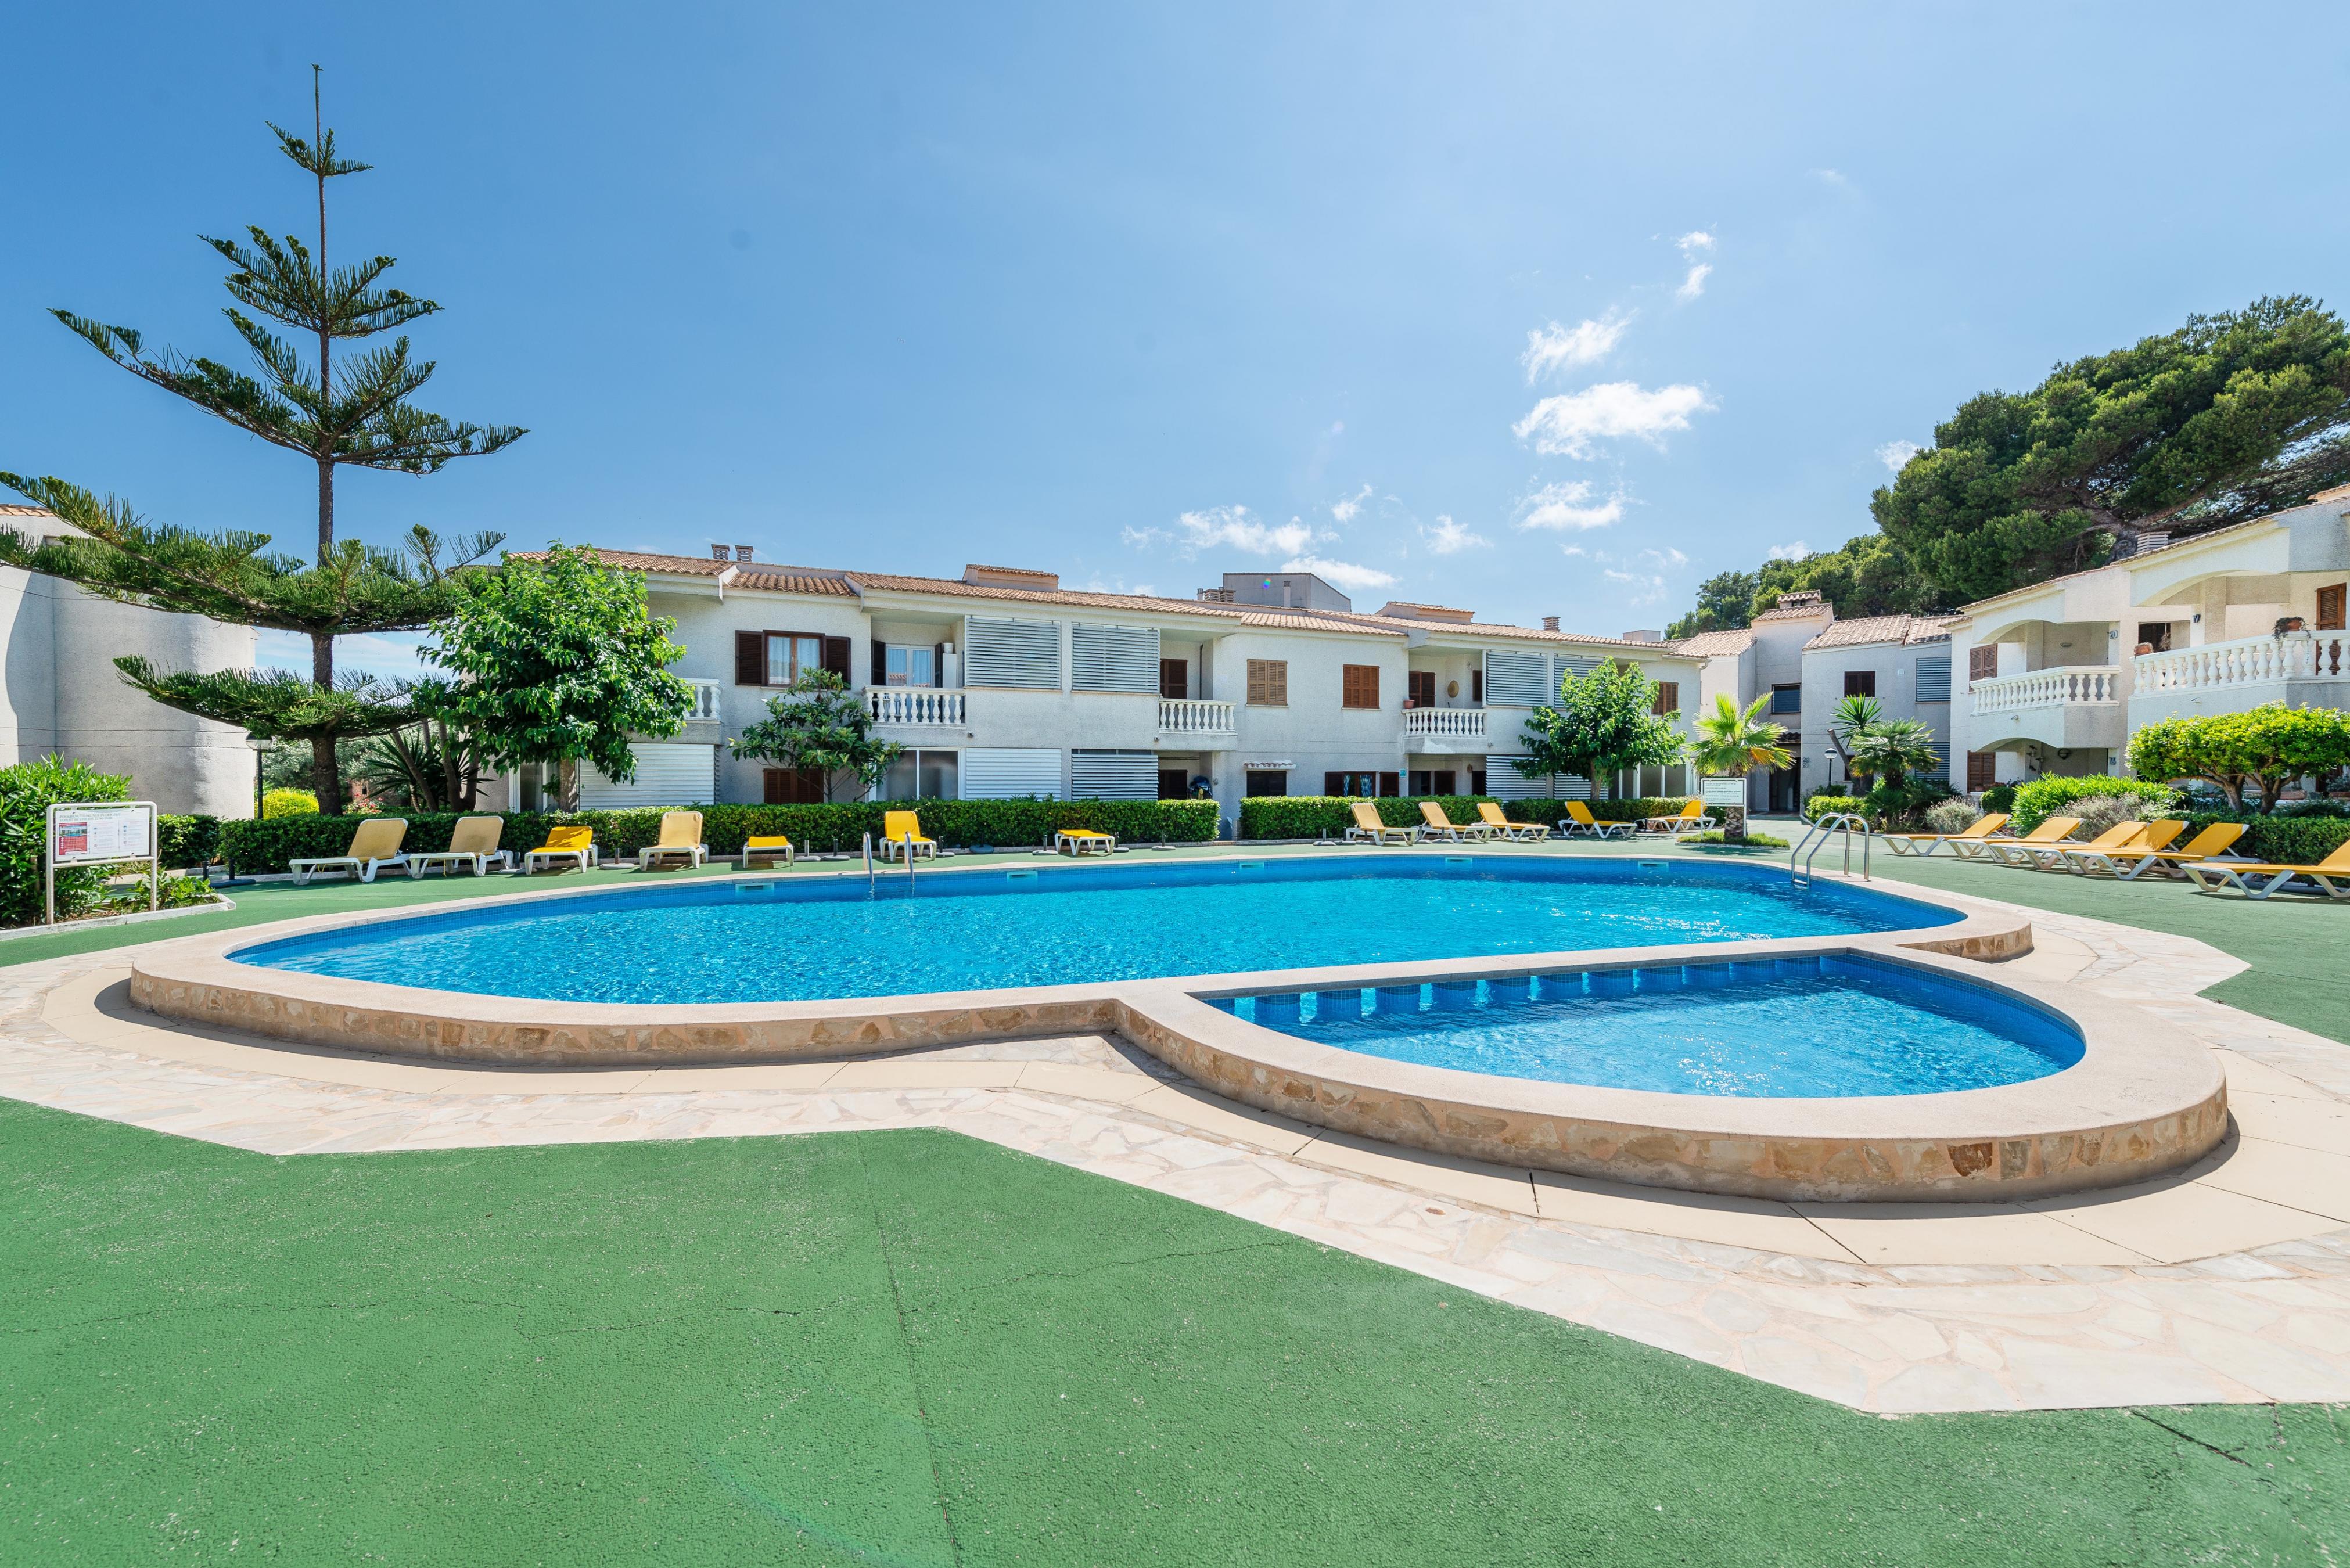 Property Image 1 - CAN NOGUERAS - Cosy apartment in residential complex with shared pool near the beach. Free WiFi.